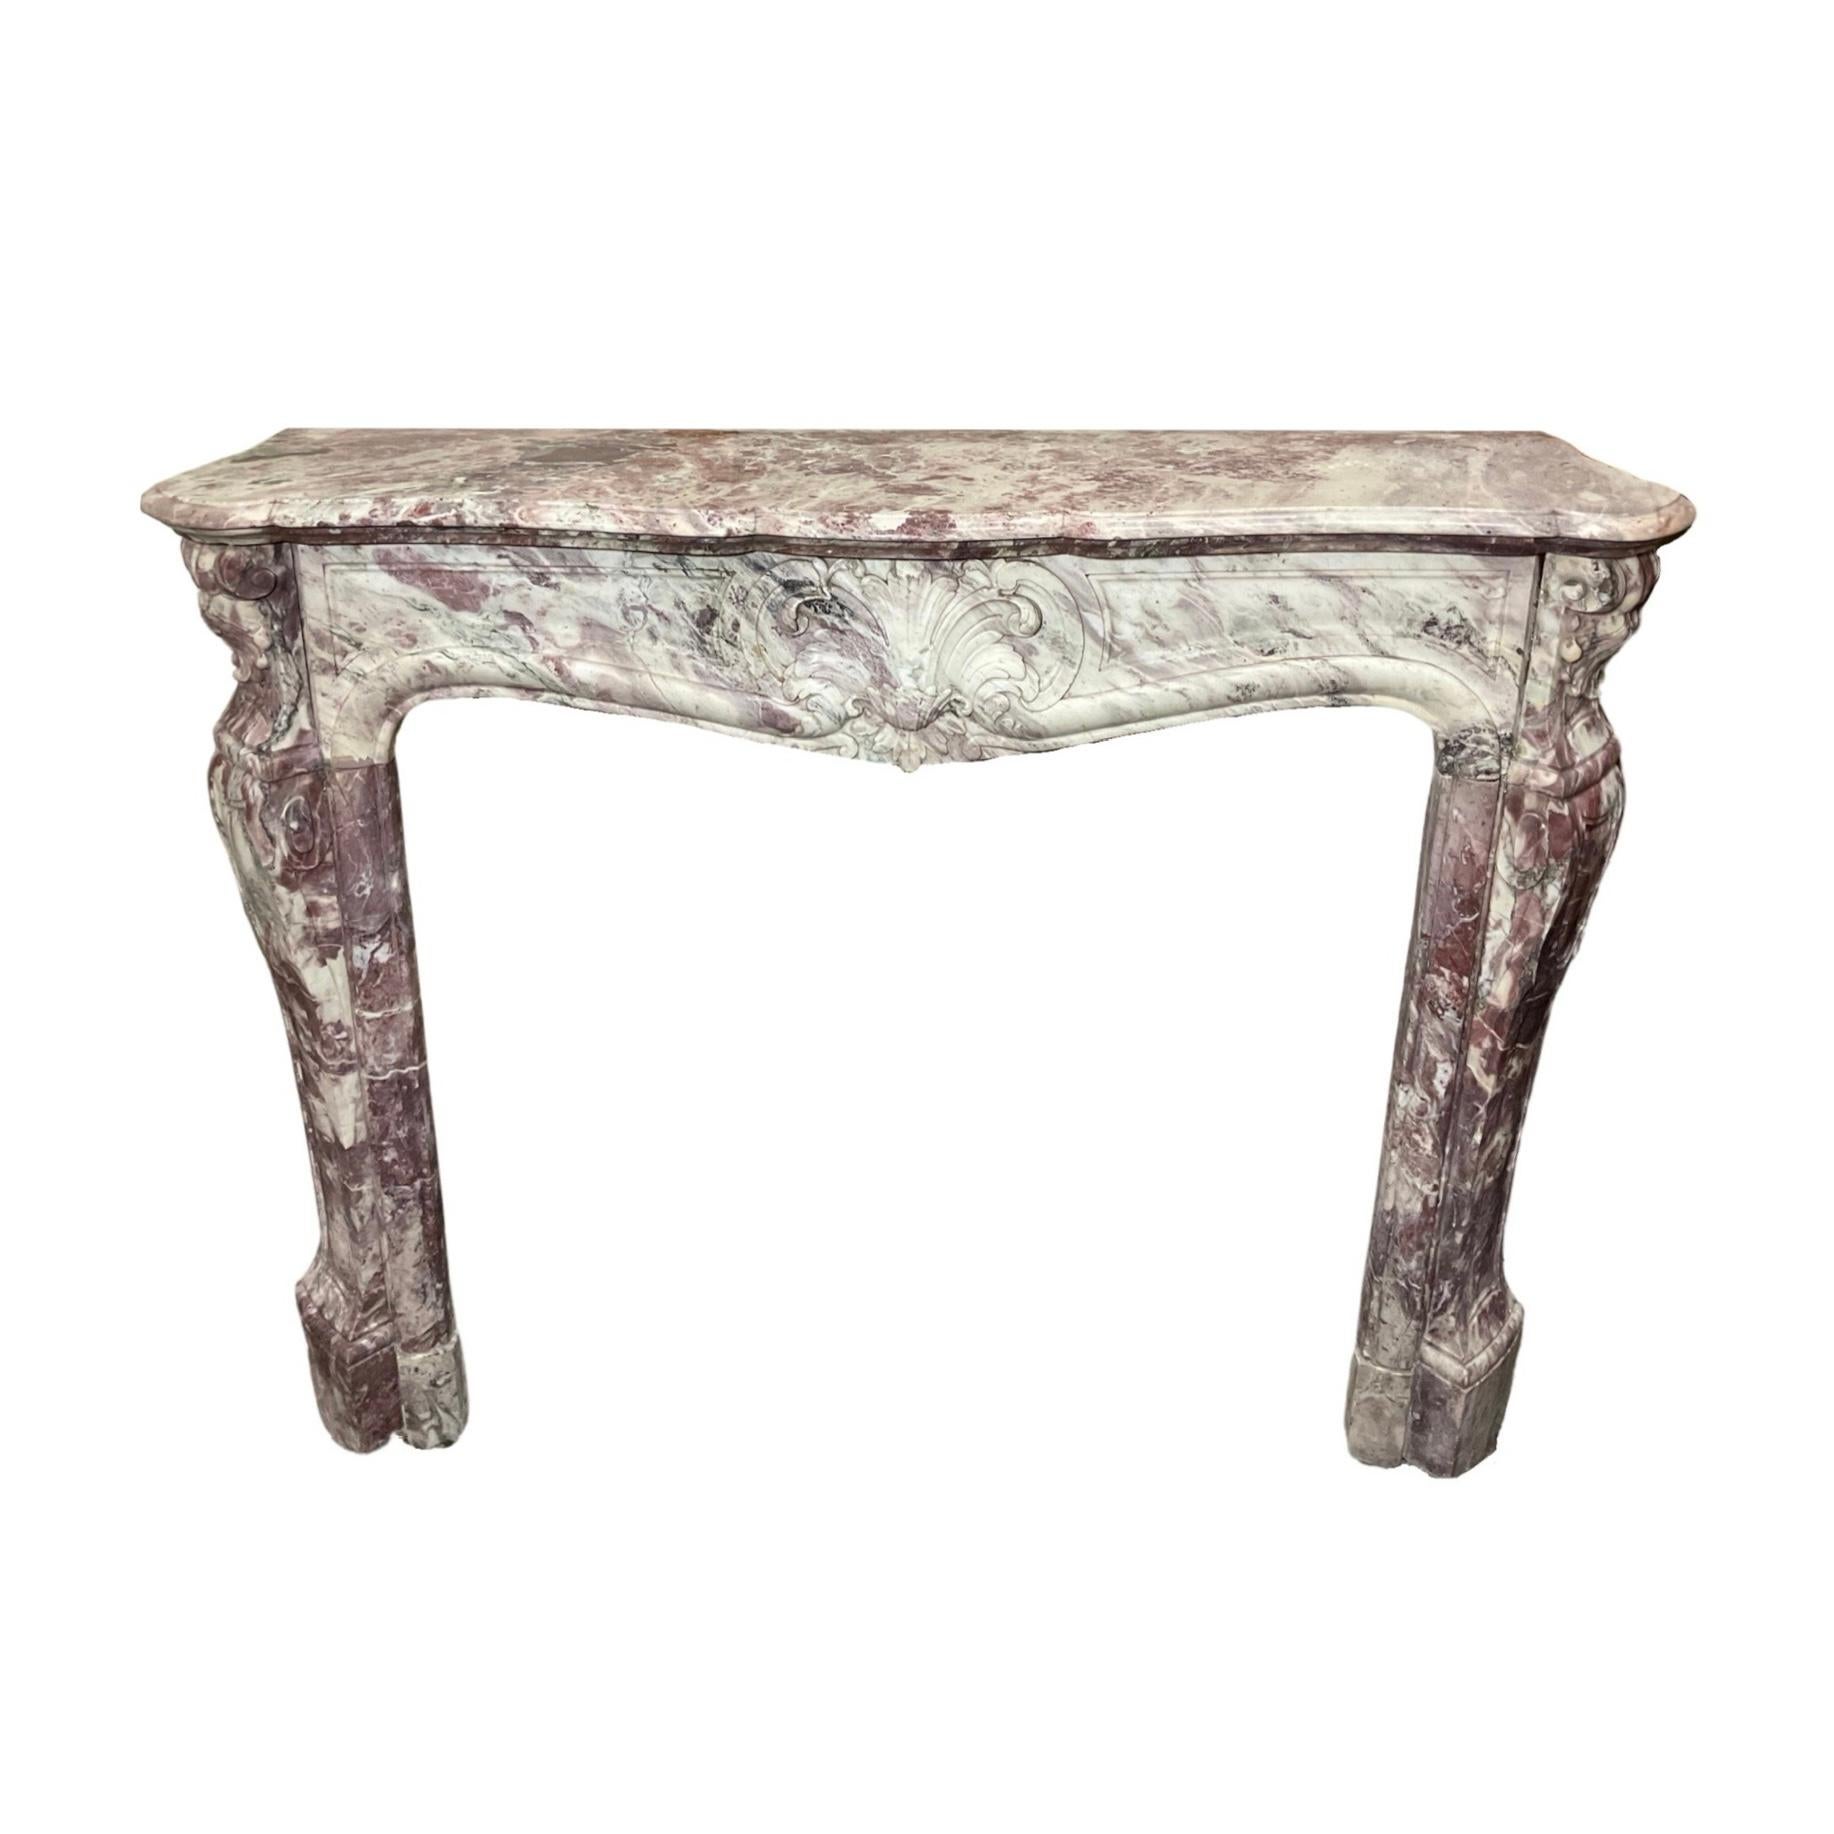 This one-of-a-kind 1850s French marble mantel is crafted from luxurious Fleur de Pêcher marble and features a Louis the 15th-inspired design. Perfect for adding timeless European elegance and refinement to any room.